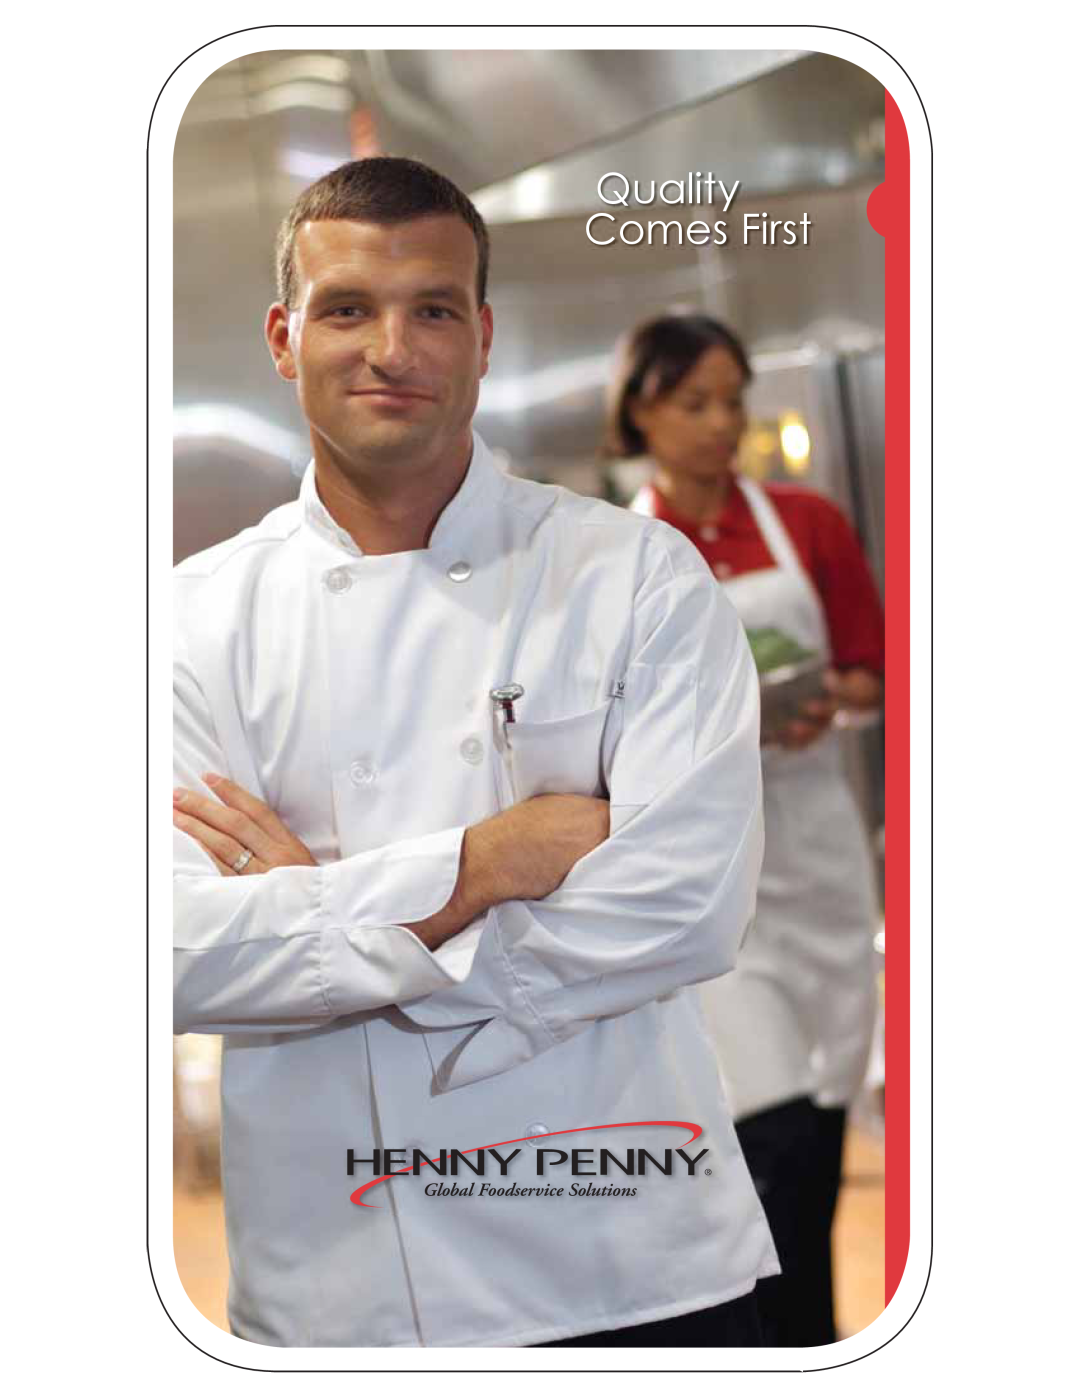 Henny Penny none manual Quality Comes First 